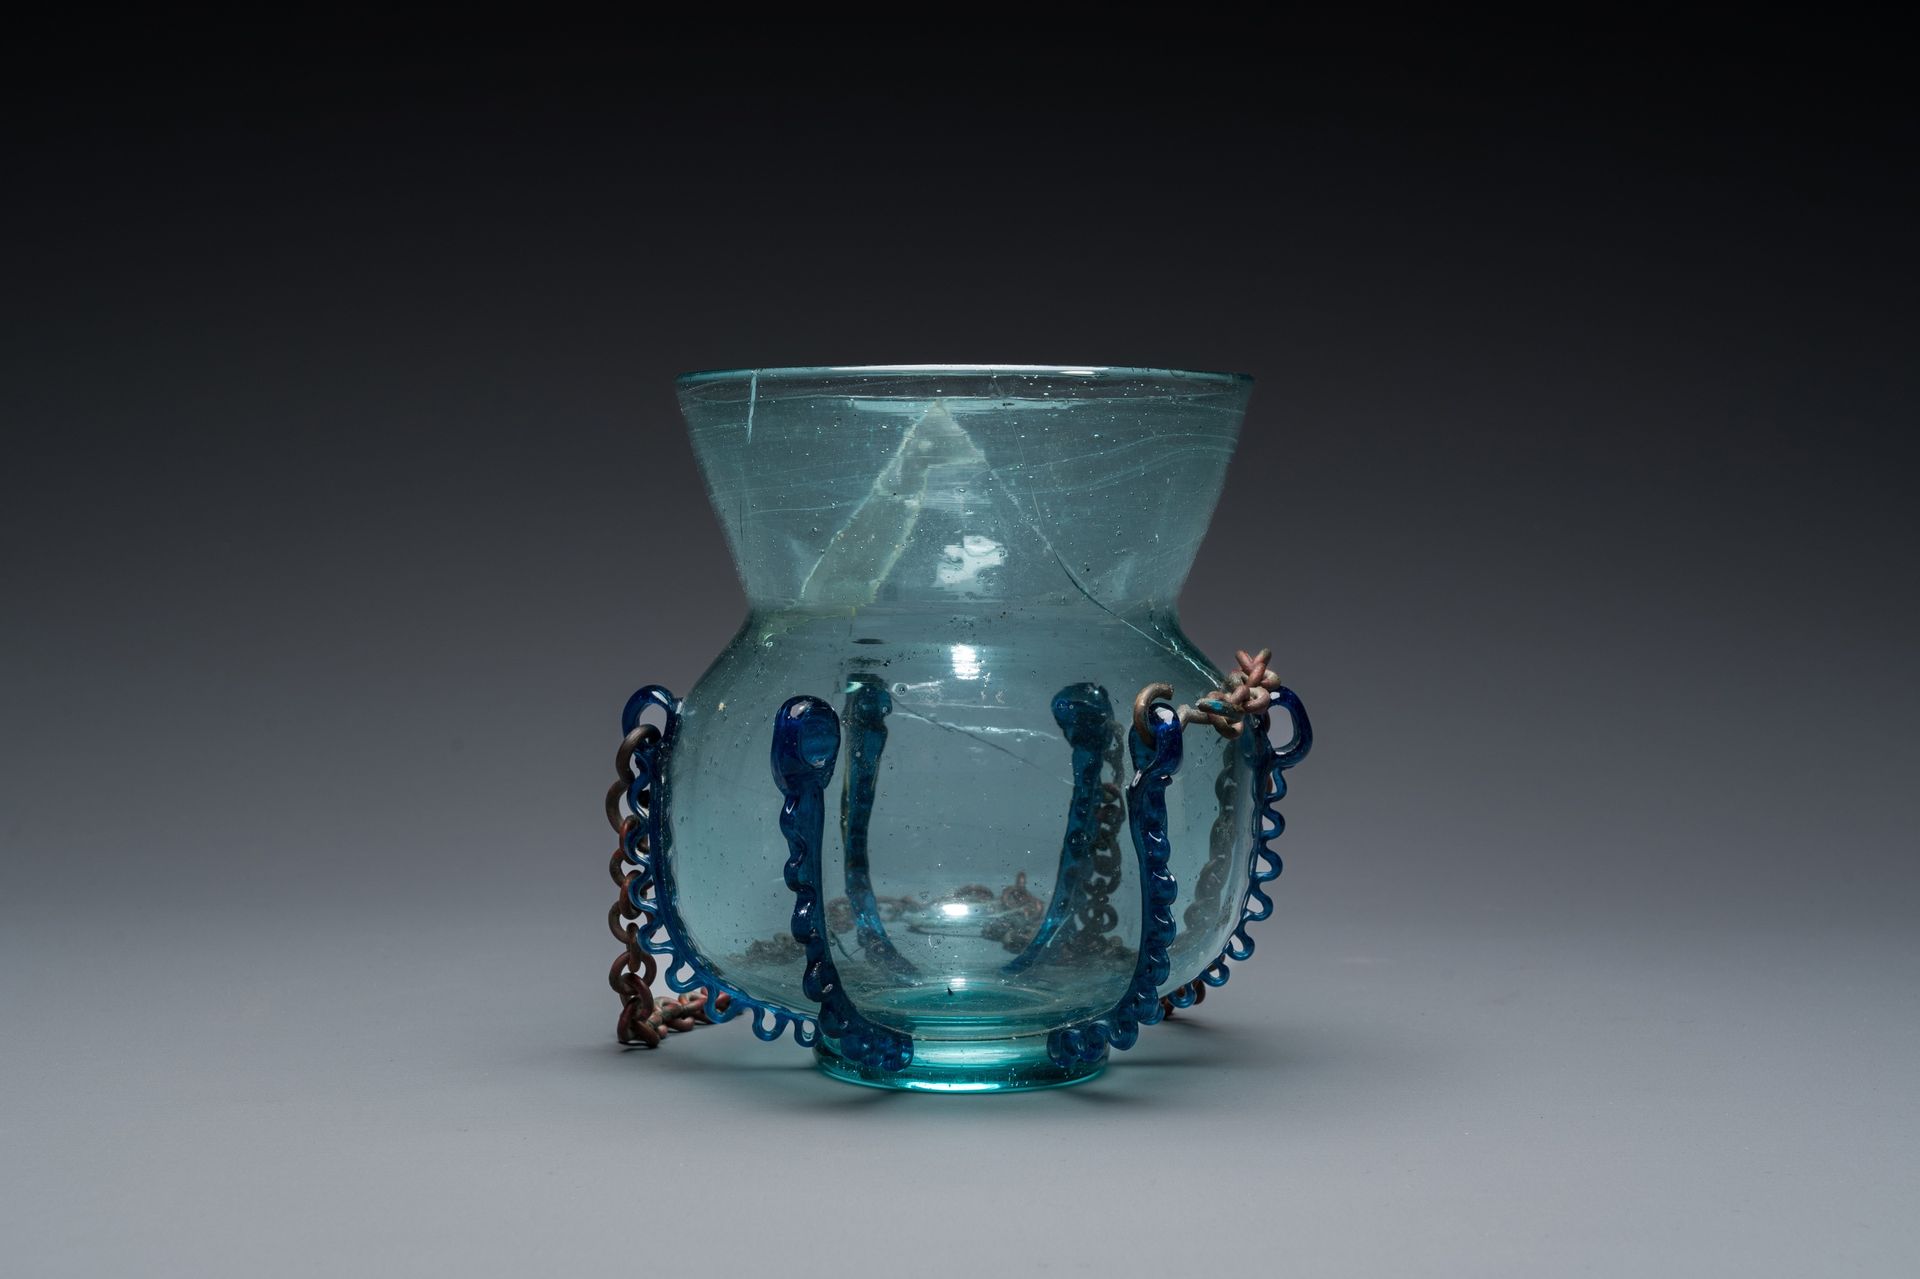 A light blue glass mosque lamp, Syria or Persia, 10th C. Título completo: Lámpar&hellip;